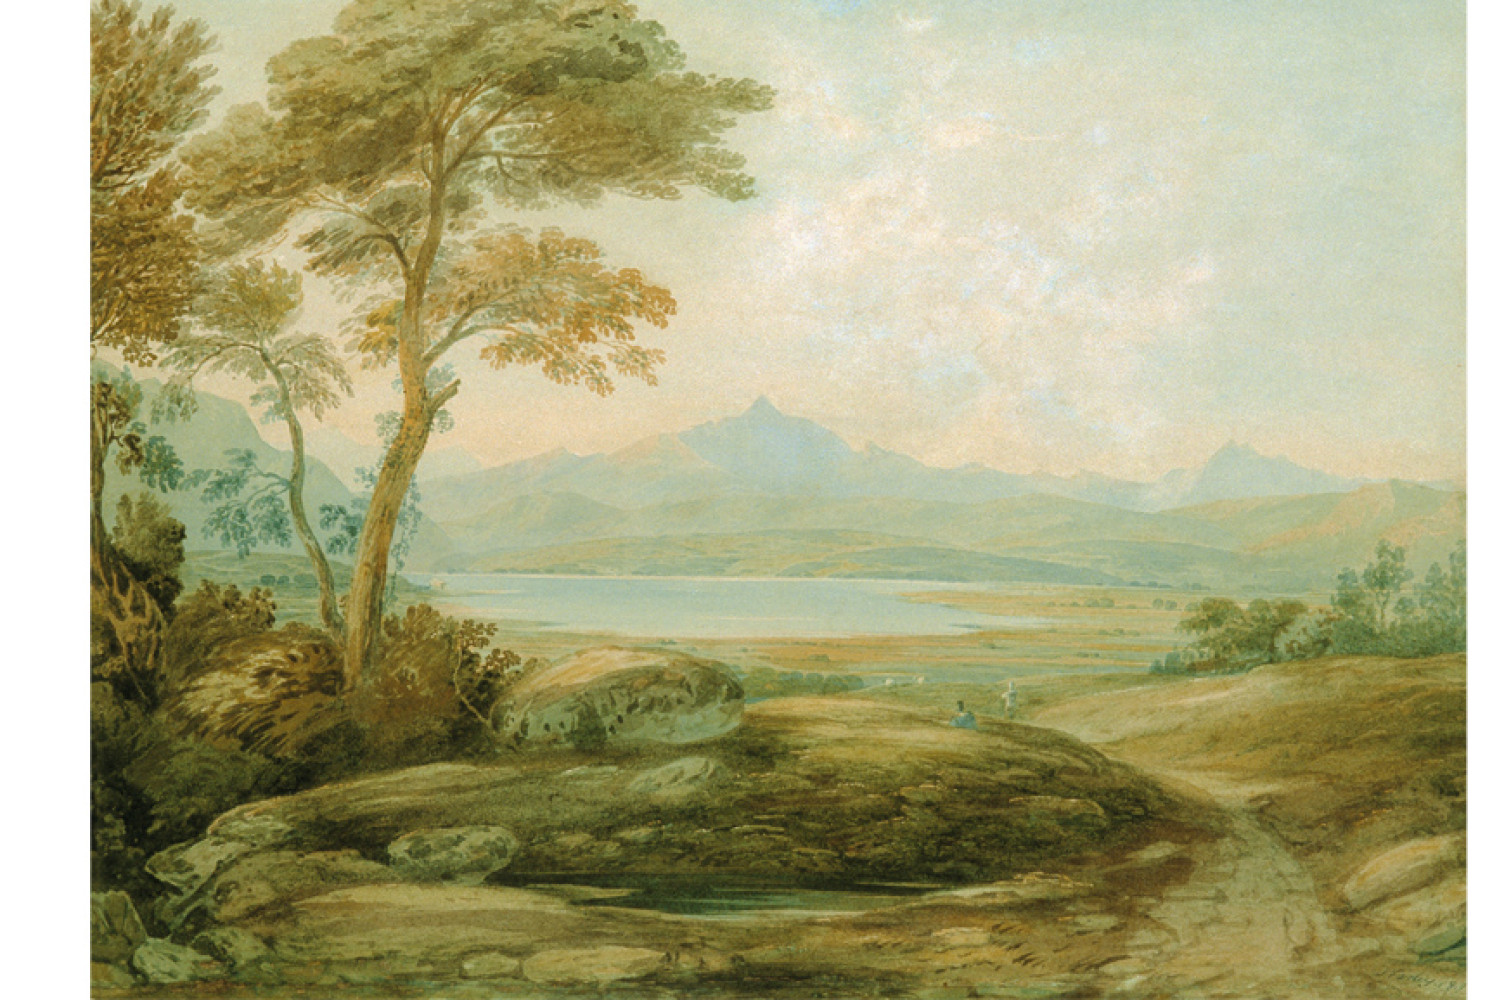 Wales, Taquin Ferry, Snowdon from the Harlech, 1819, By John Varley (British, 1778 - 1842); Watercolor on paper; Bequest of Mr. John H.D. Wigger; 2004.011.0015
